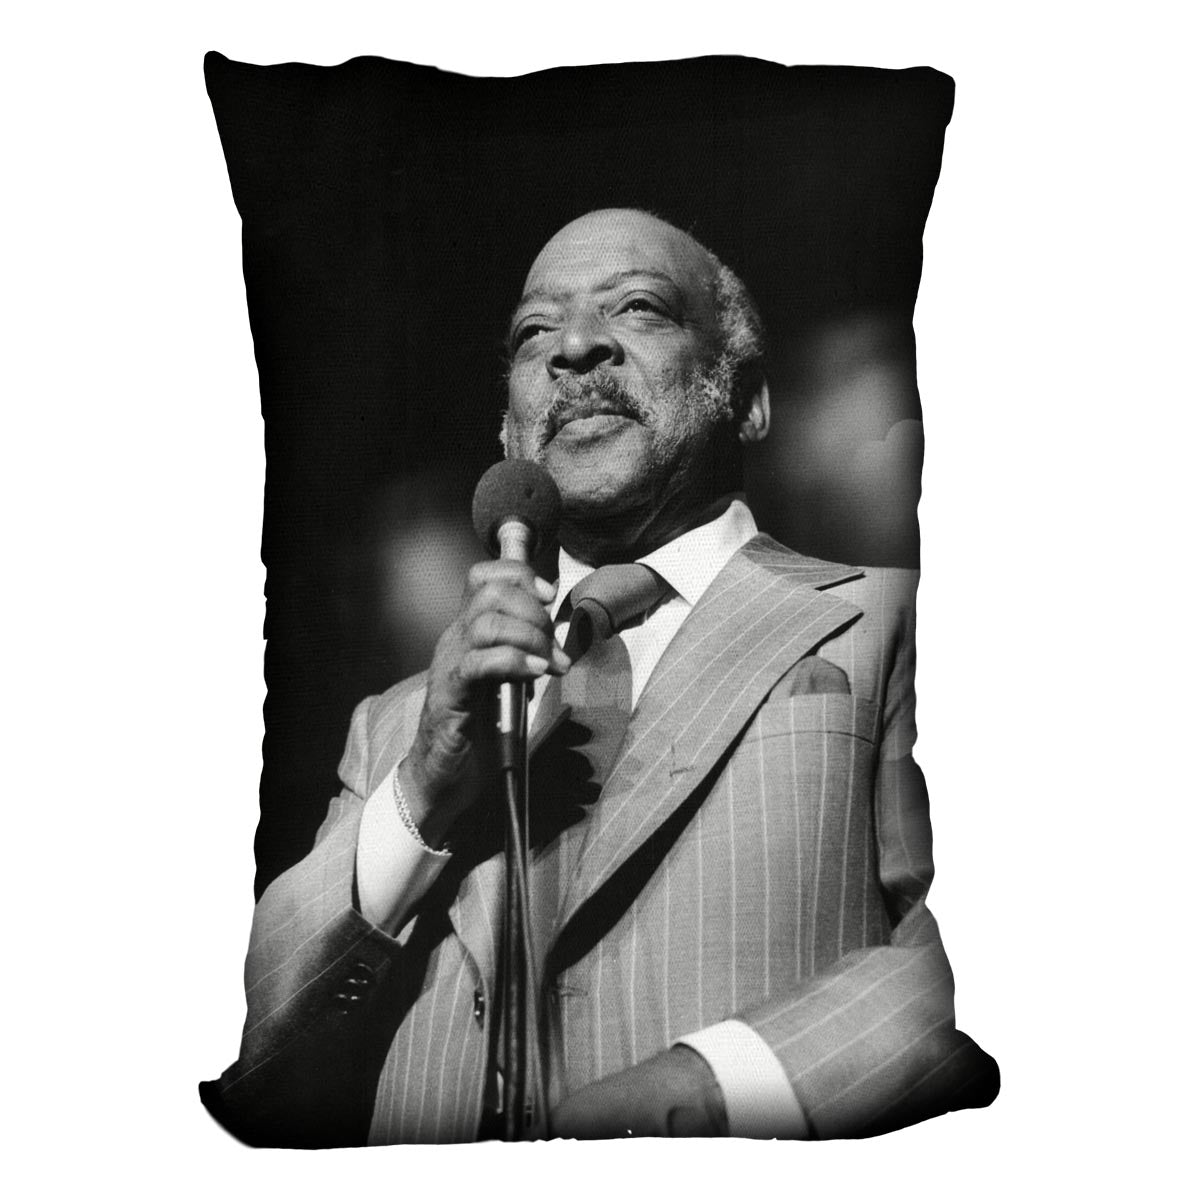 Count Basie performing Cushion